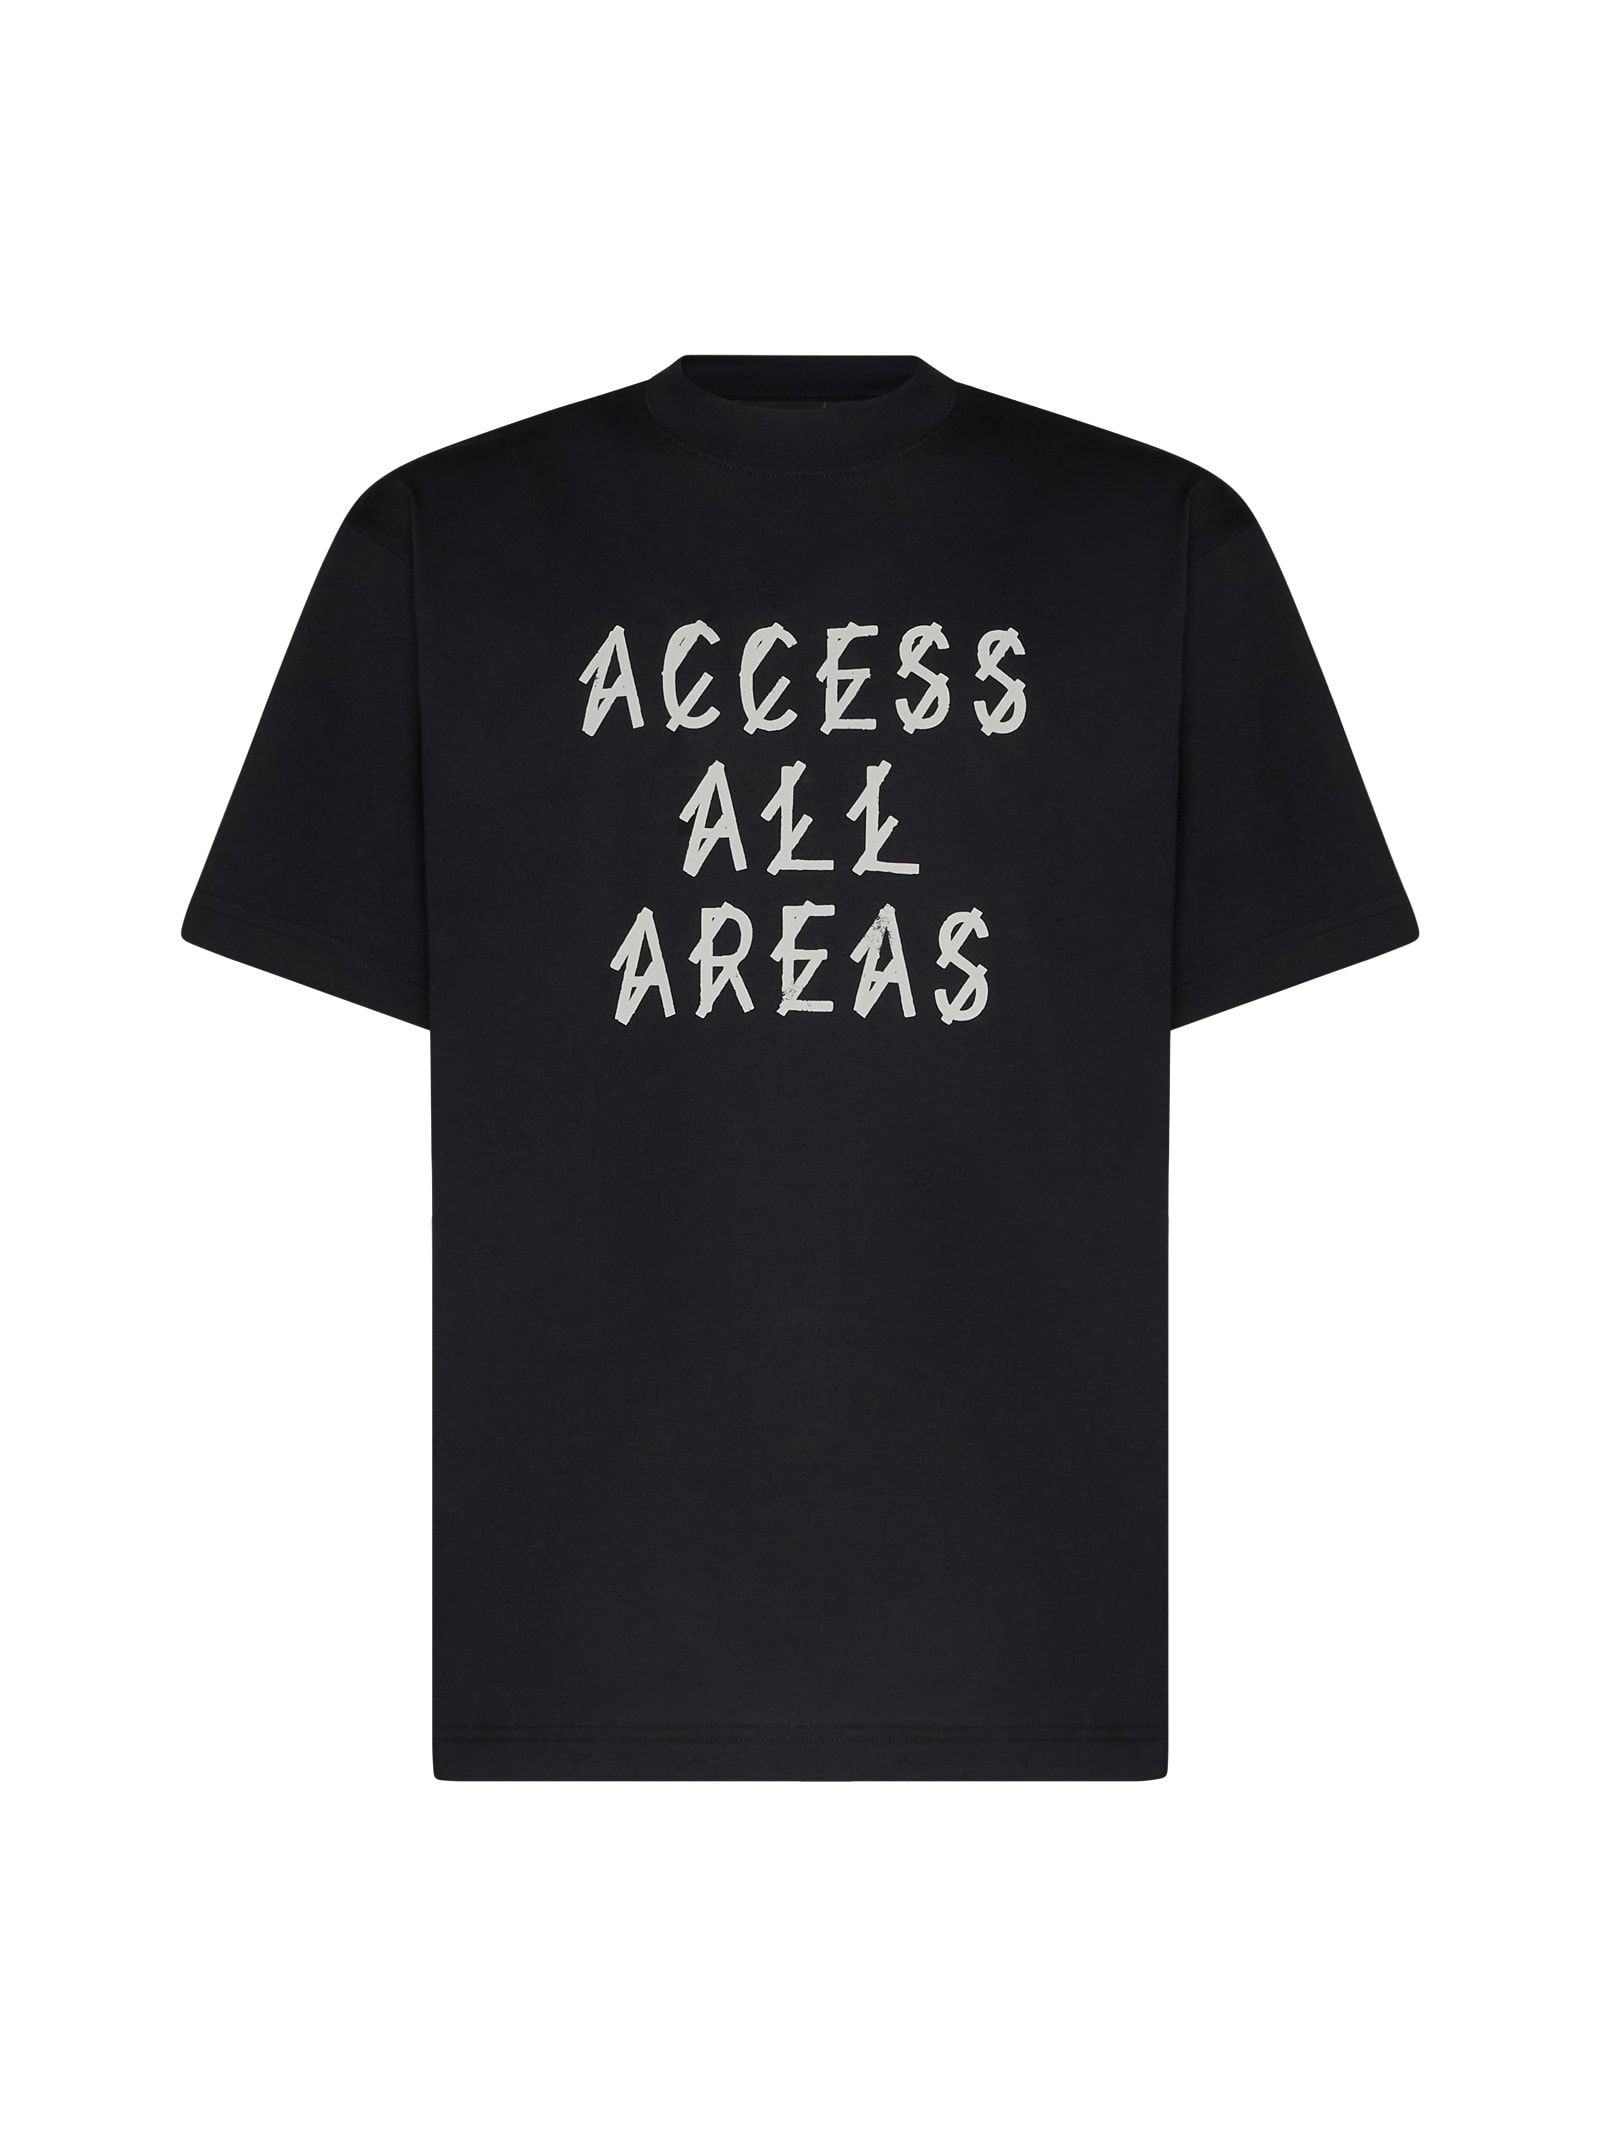 Shop 44 Label Group T-shirt In Black+aaa Print